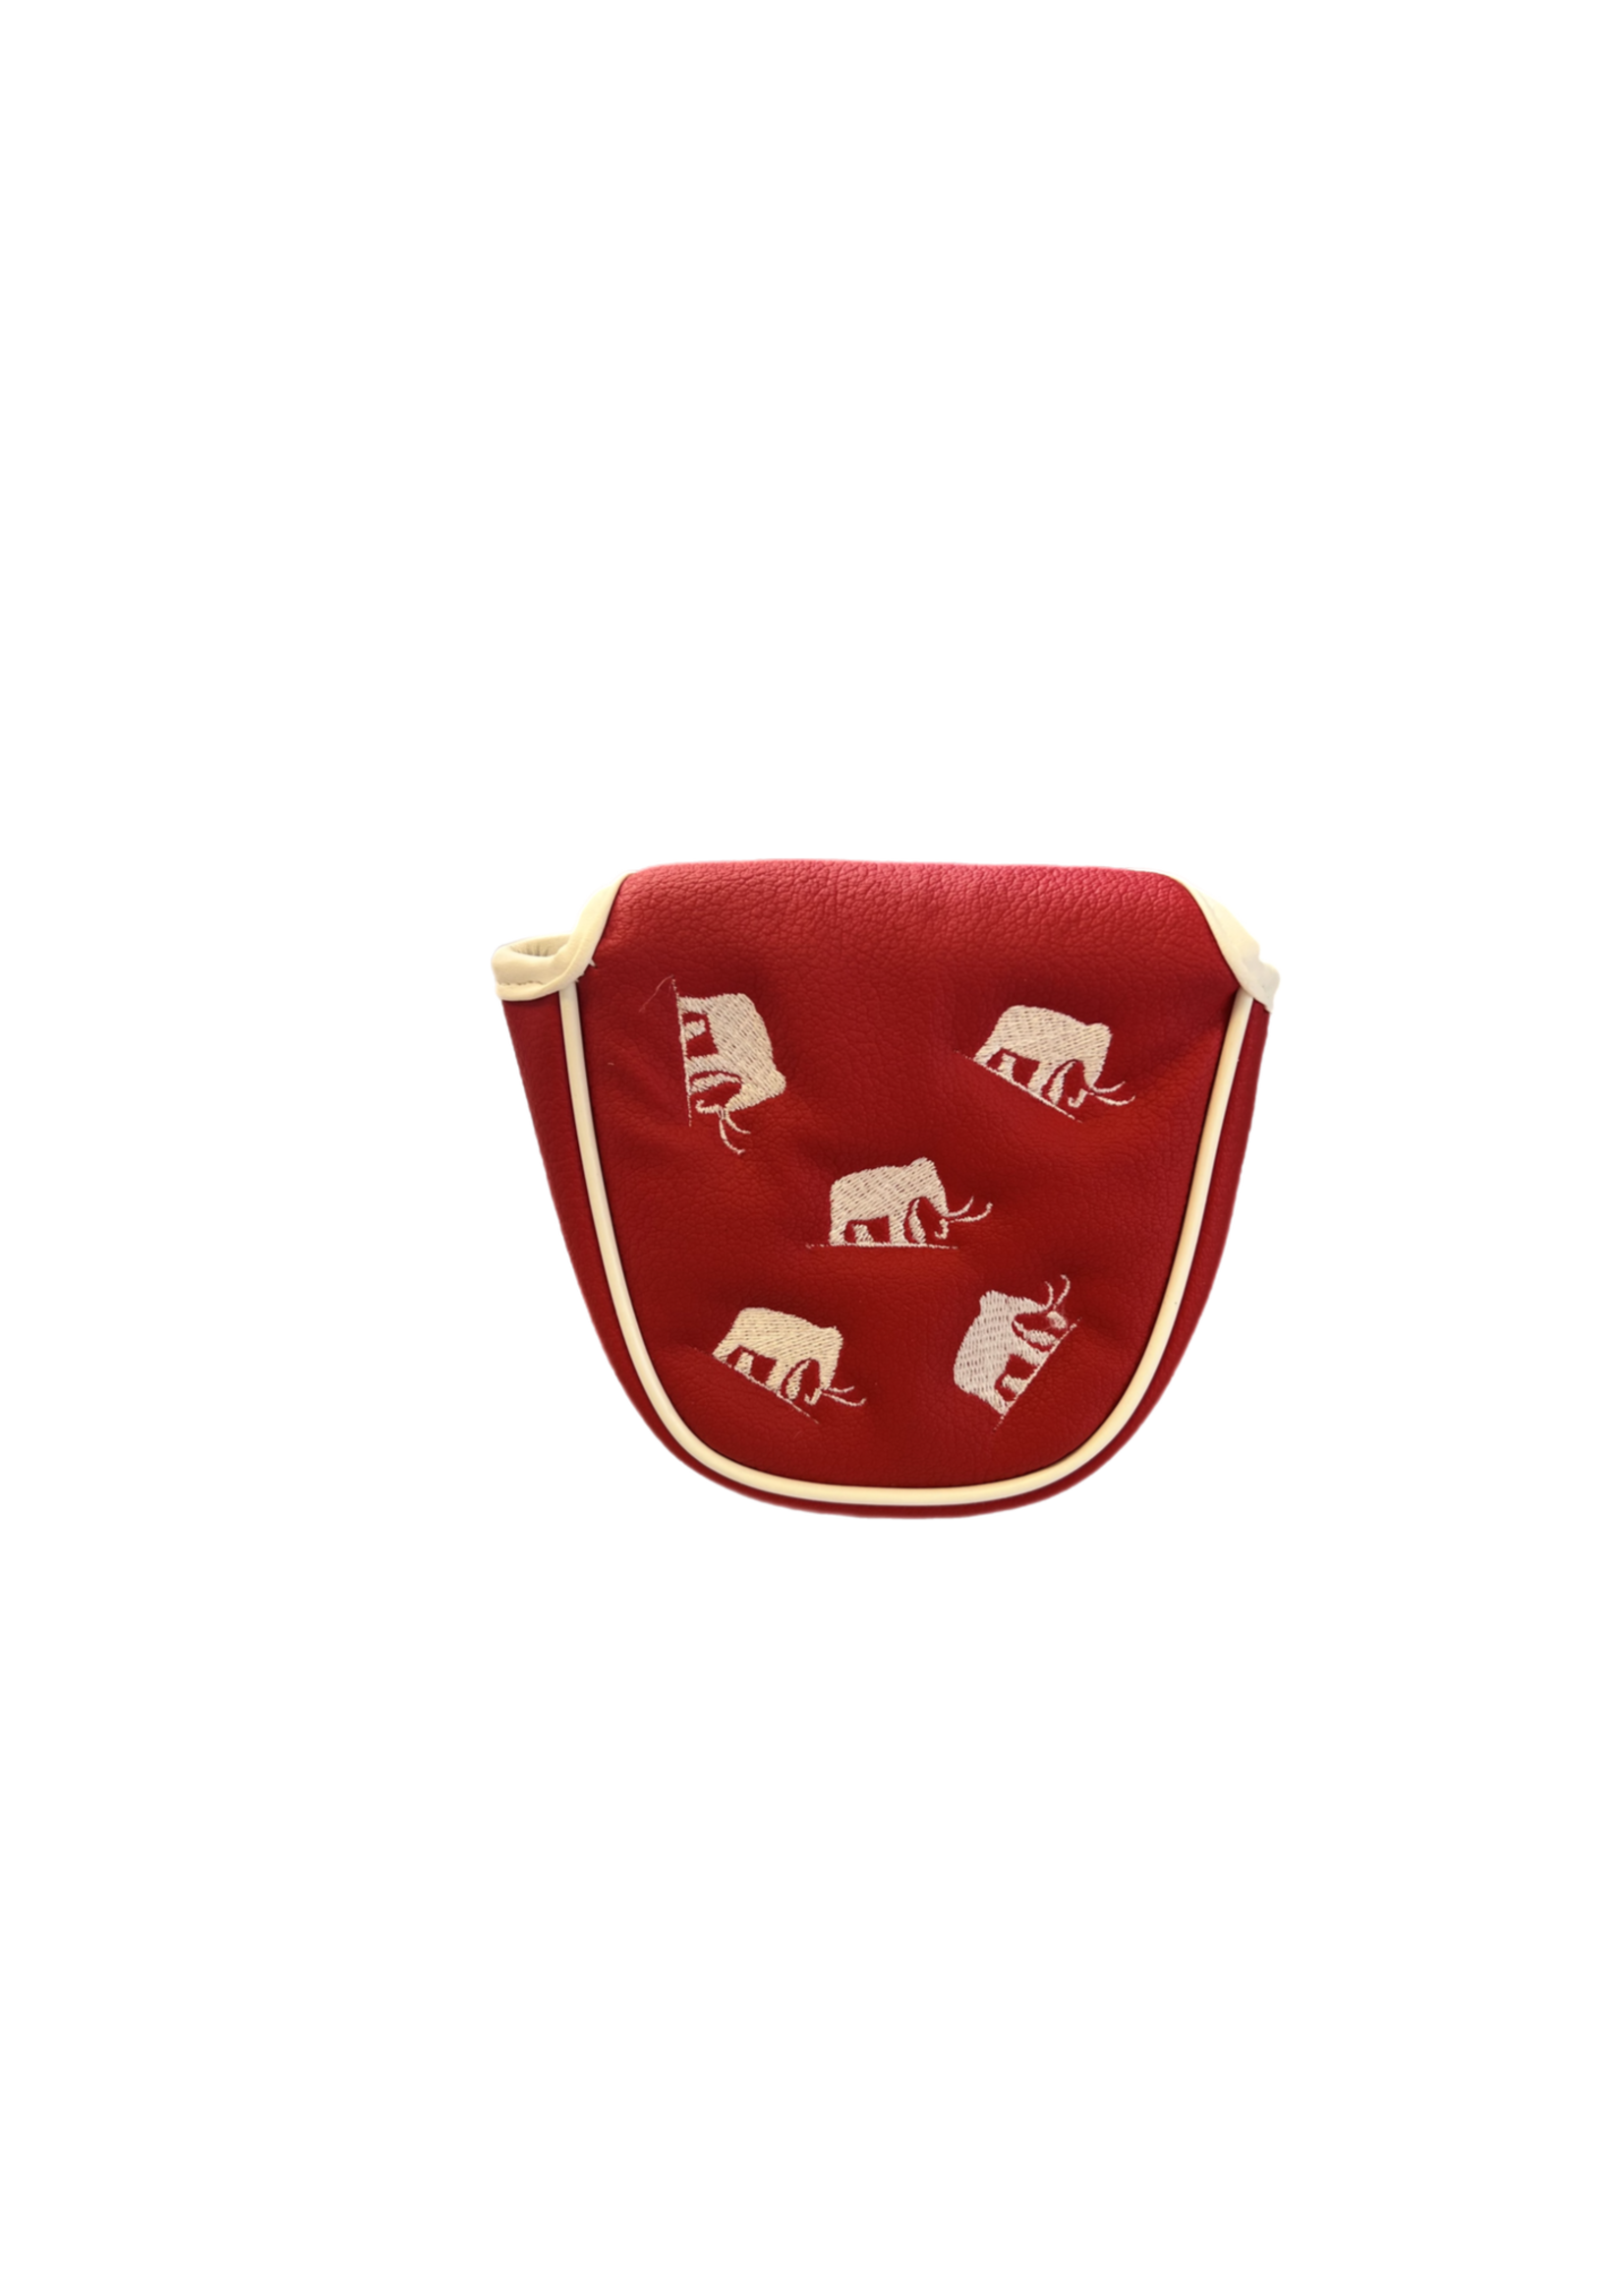 Mammoth Mallet Putter Covers